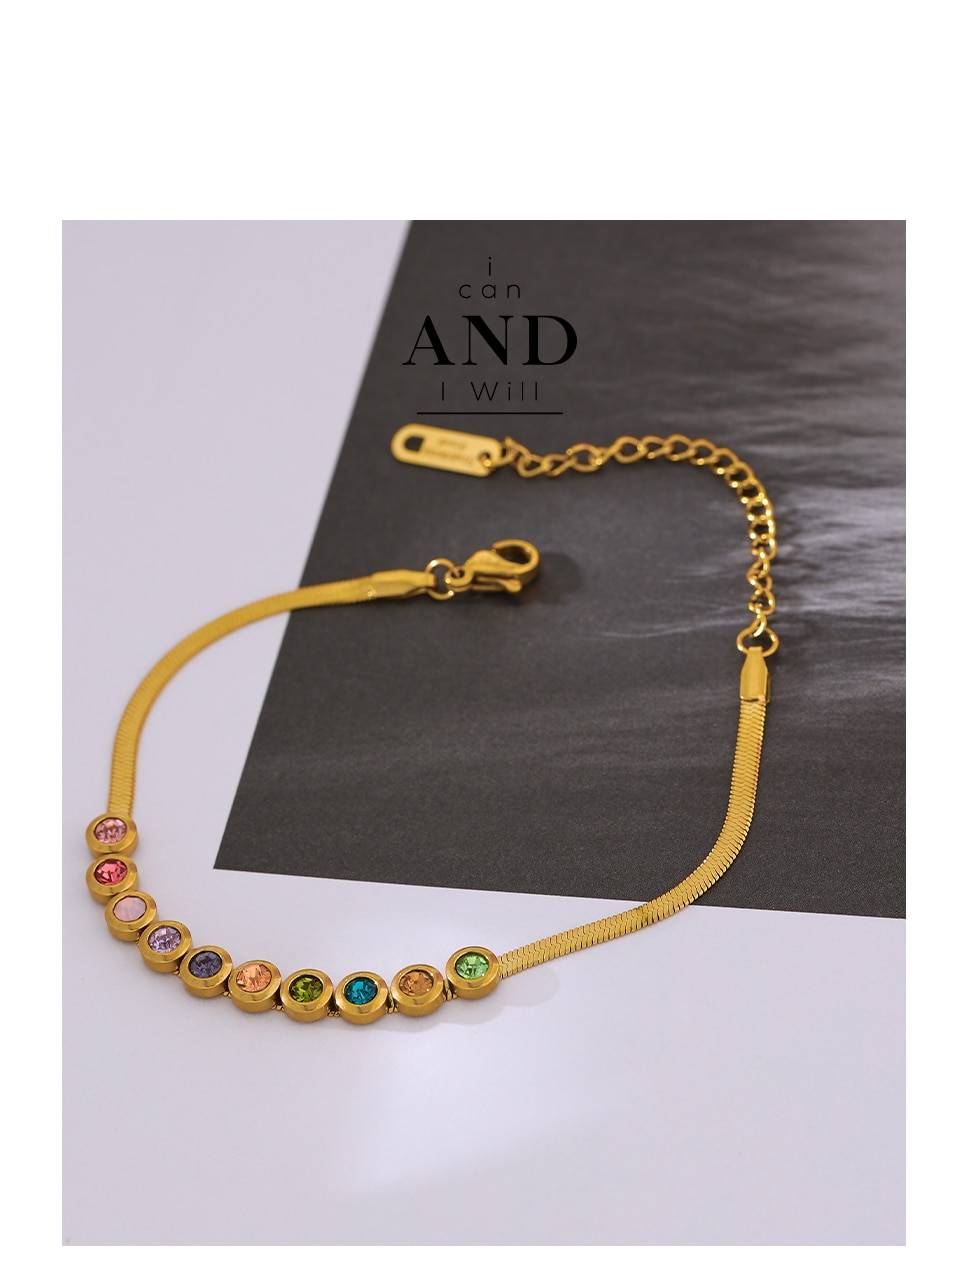 Yhpup Exquisite Colorful Cubic Zirconia Bracelet New Stainless Steel 18 K Metal Rainbow Jewelry Bracelet 2021 браслеты женские Uncategorized 8d255f28538fbae46aeae7: YH1537A Necklace|YH1538A Bracelet